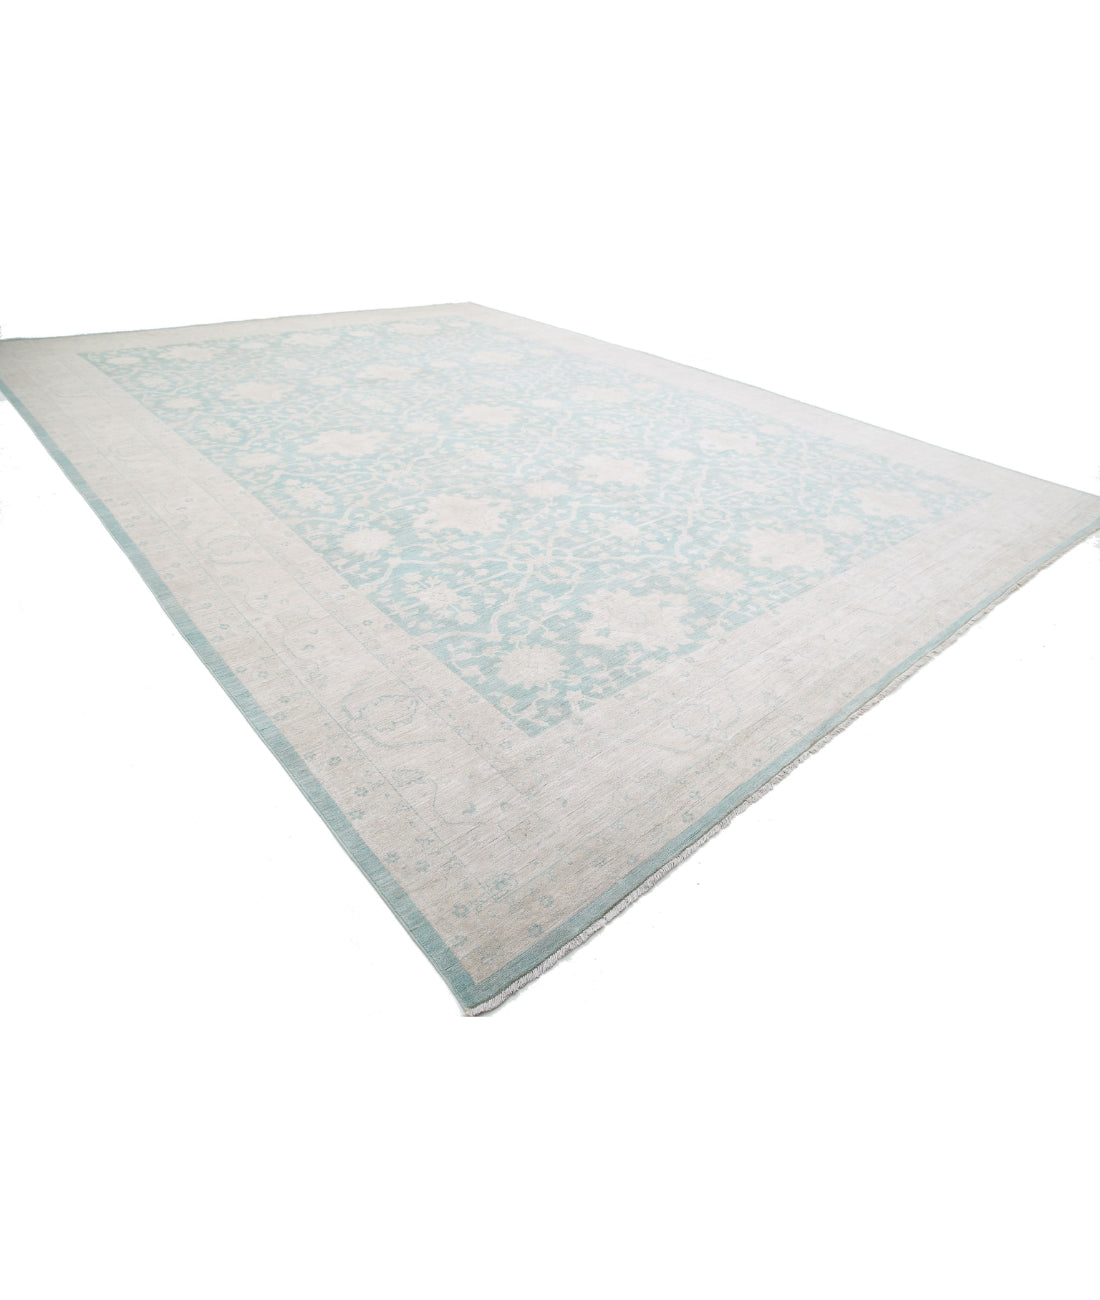 Hand Knotted Oushak Wool Rug - 15'10'' x 21'9'' 15'10'' x 21'9'' (475 X 653) / Teal / Ivory